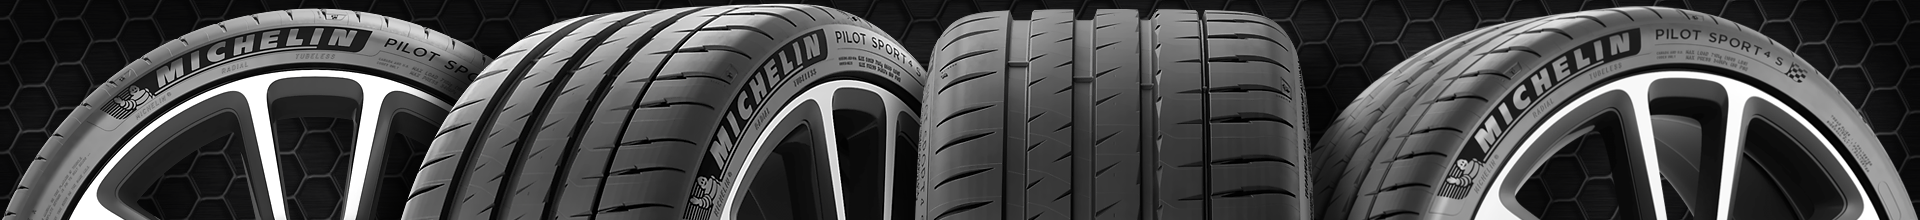 275 30 20 discount tires from Tire Outlet US